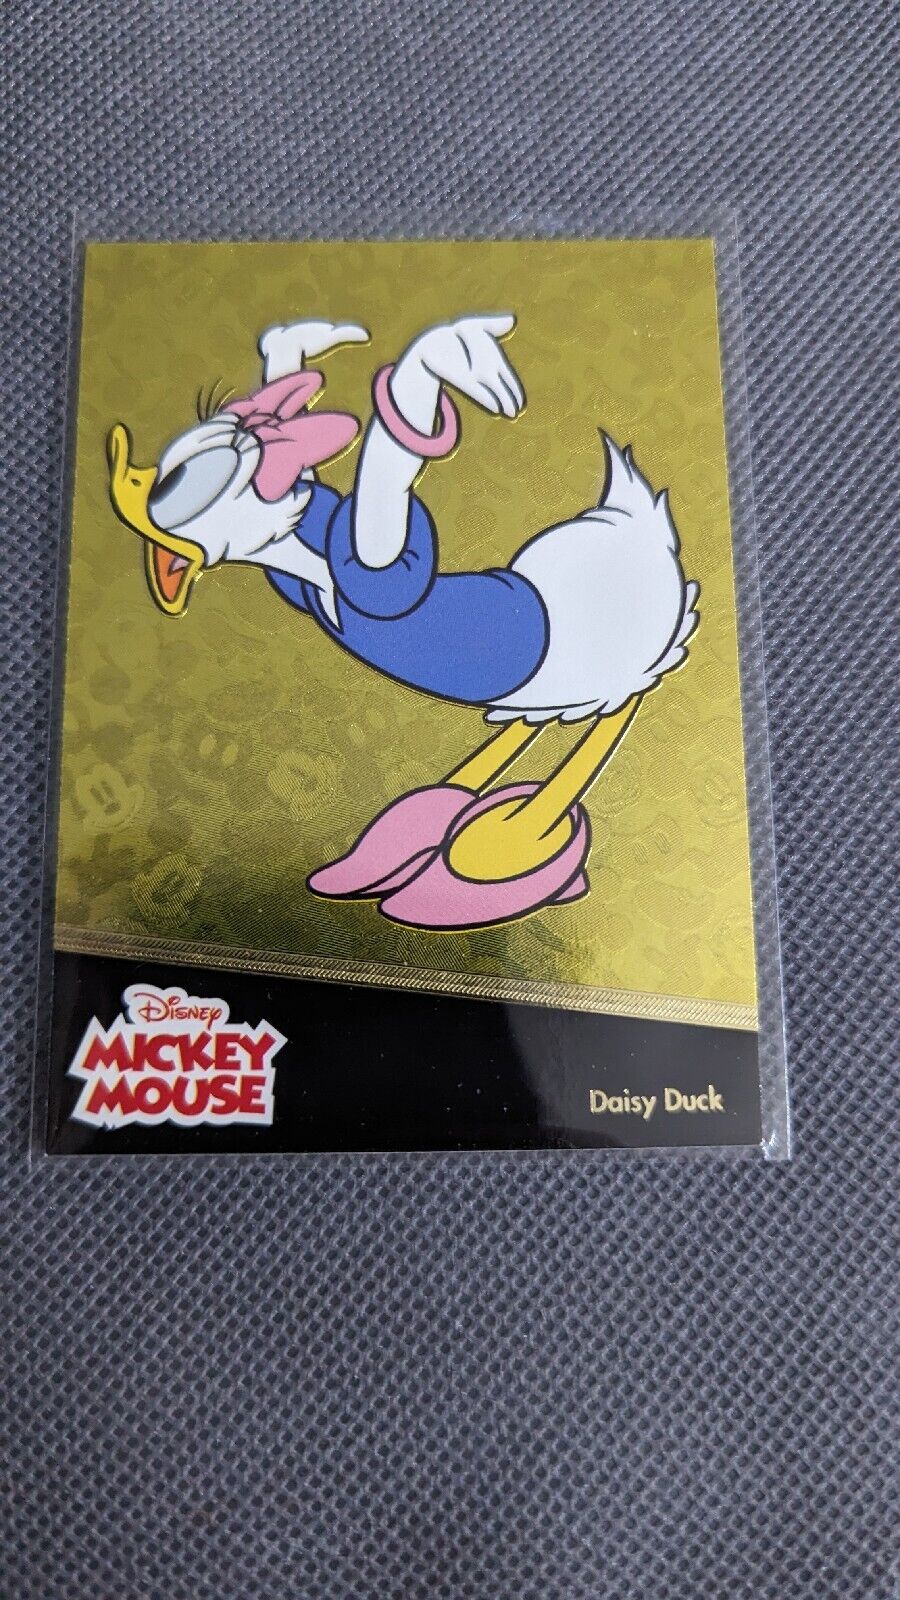 2020 UPPER DECK DISNEY'S MICKEY MOUSE UD BASE CARD - DAISY DUCK #88